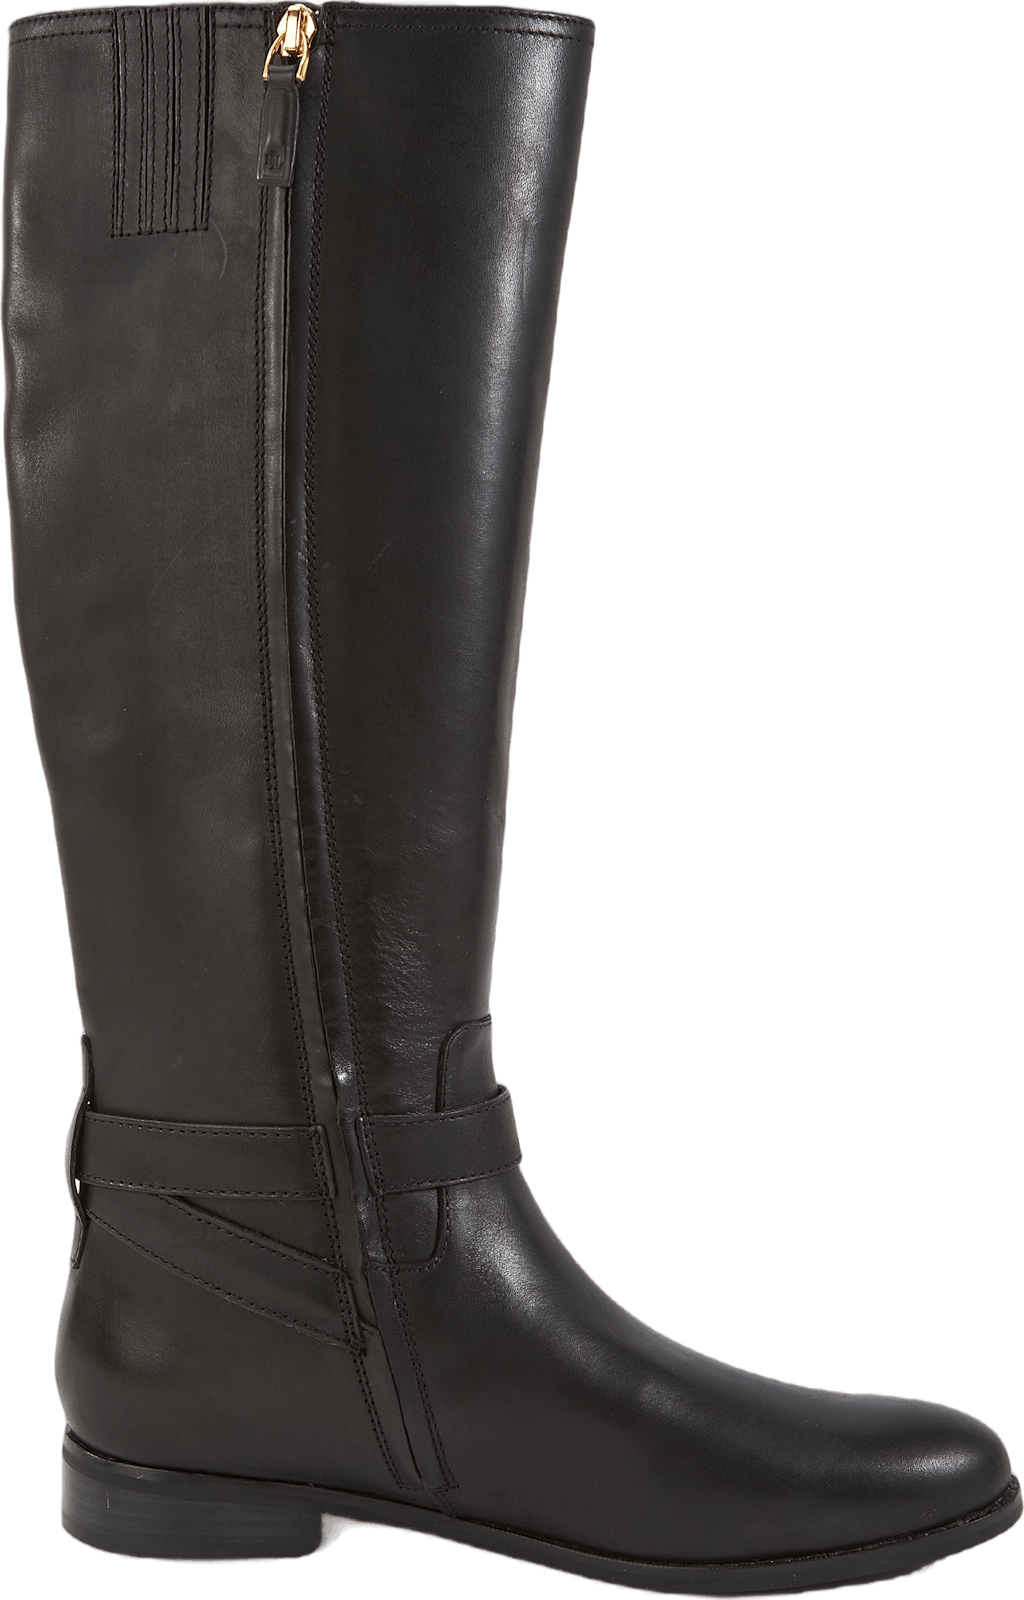 Brittaneybootstall Boot Black Shoes for every occasion Footway